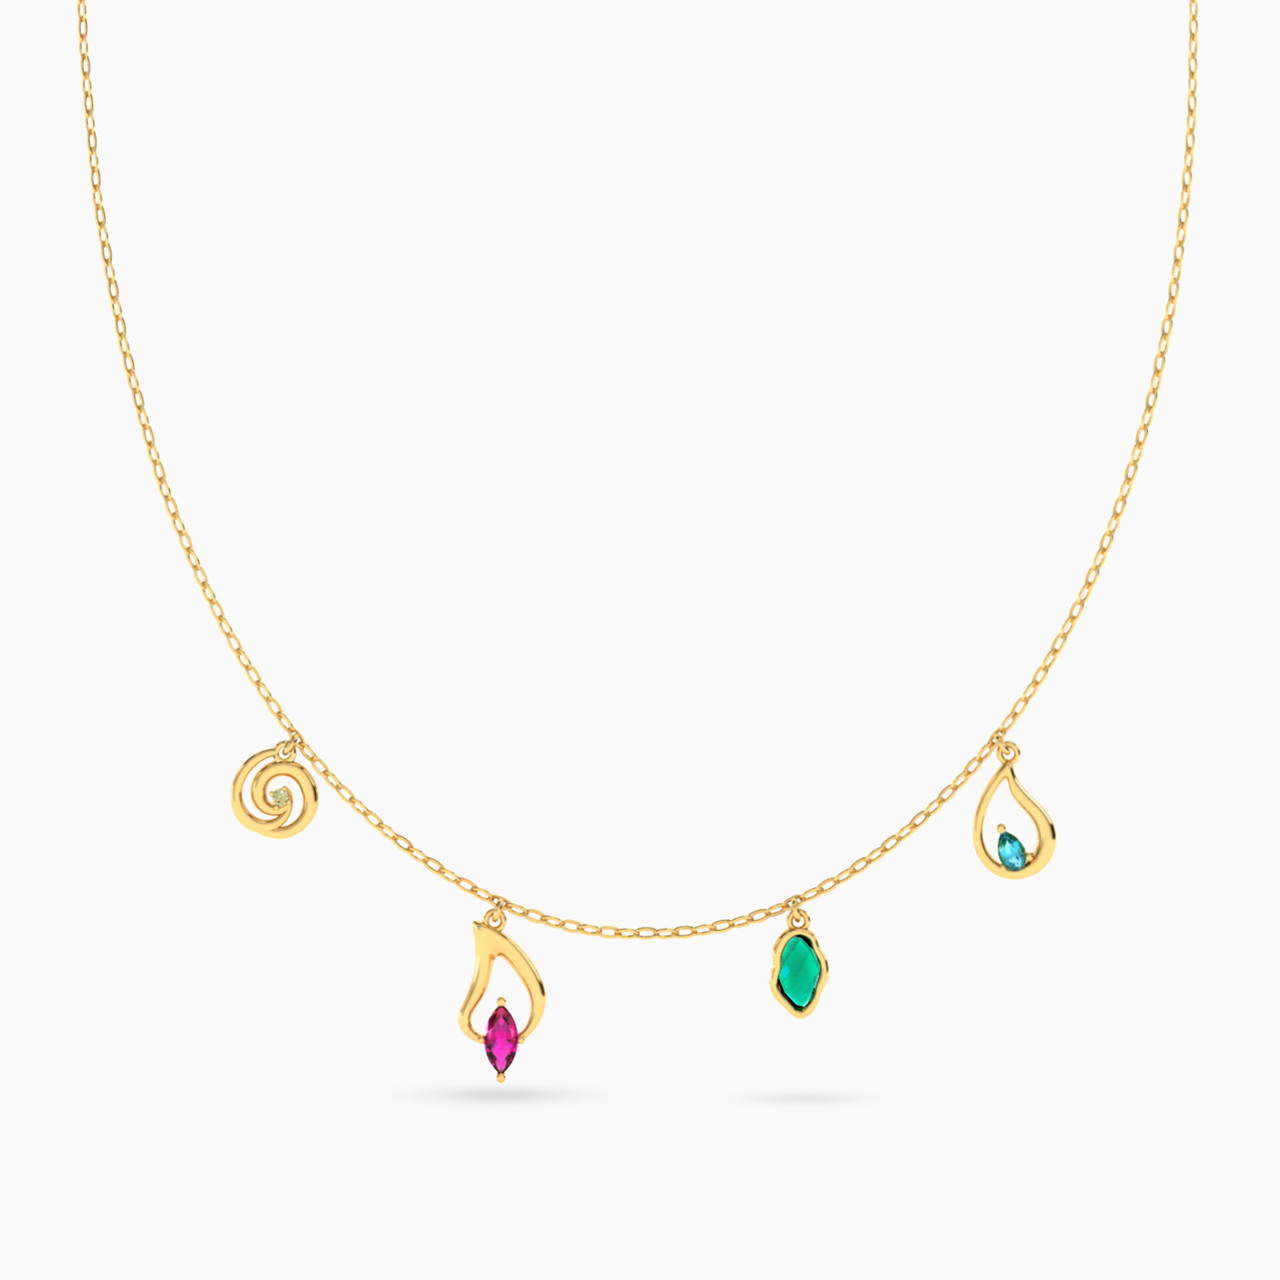 14K Gold Colored Stones Chain Necklace